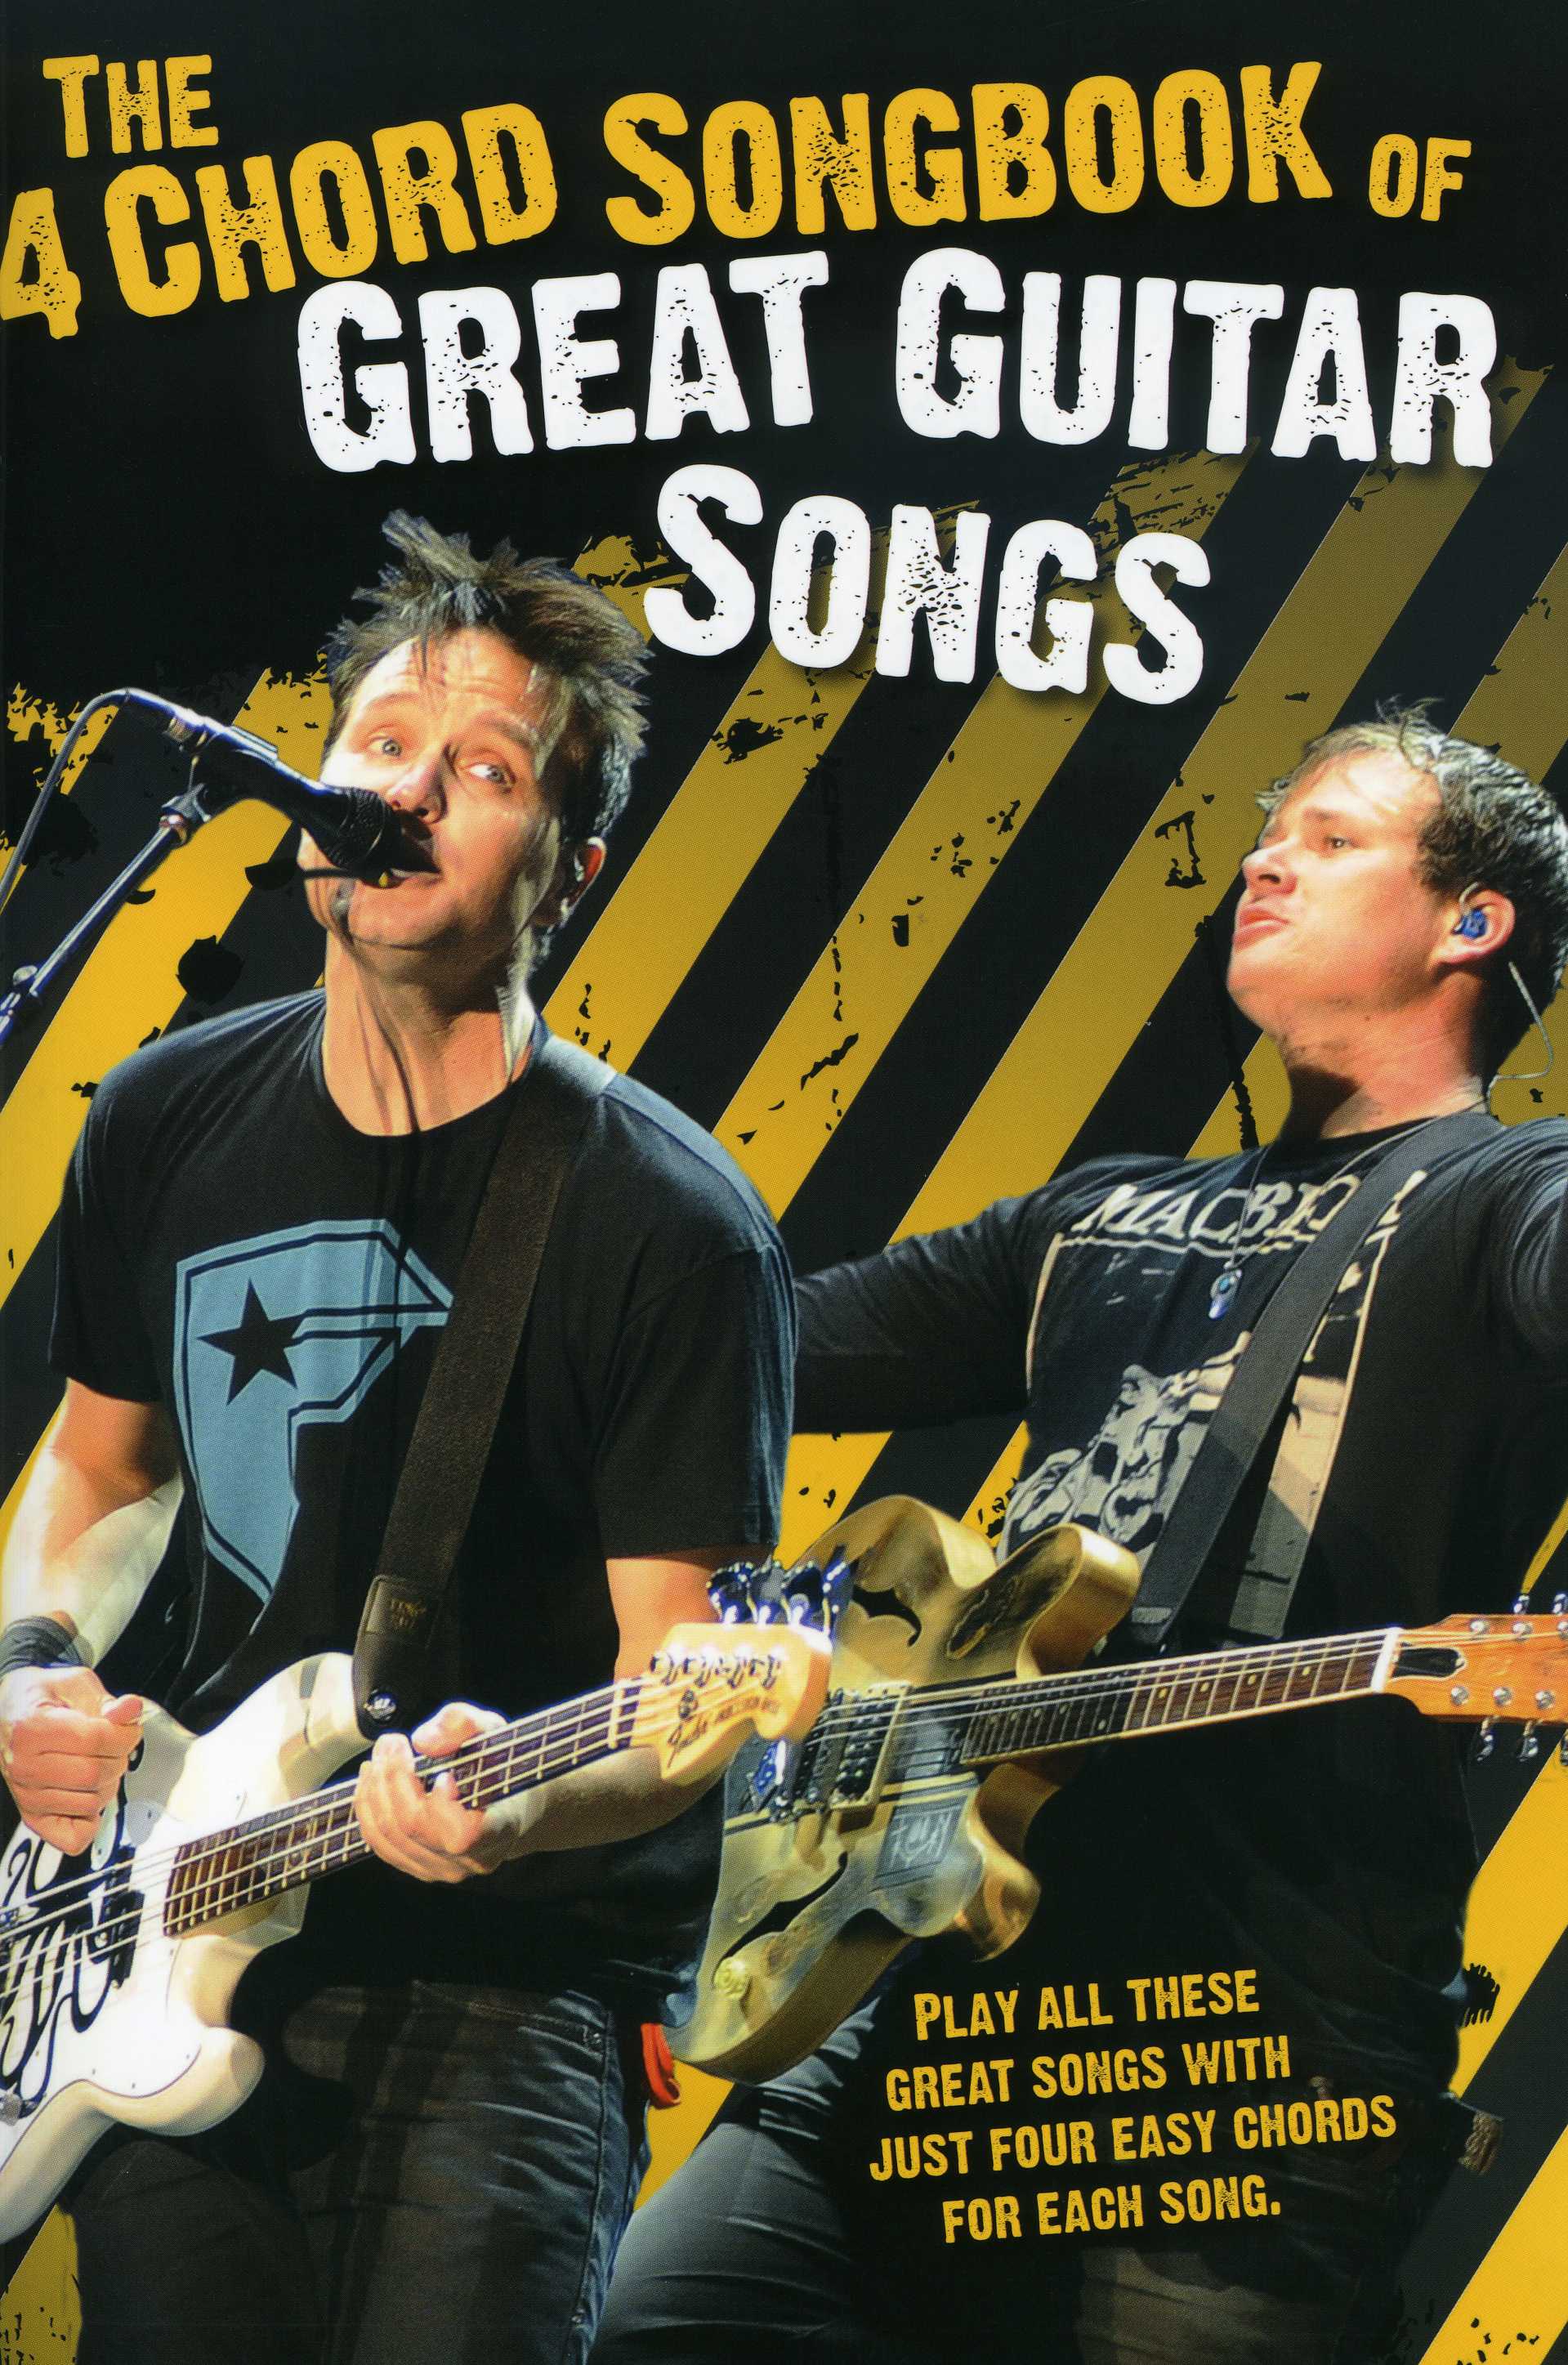 The 4 Chord Songbook Of Great Guitar Songs